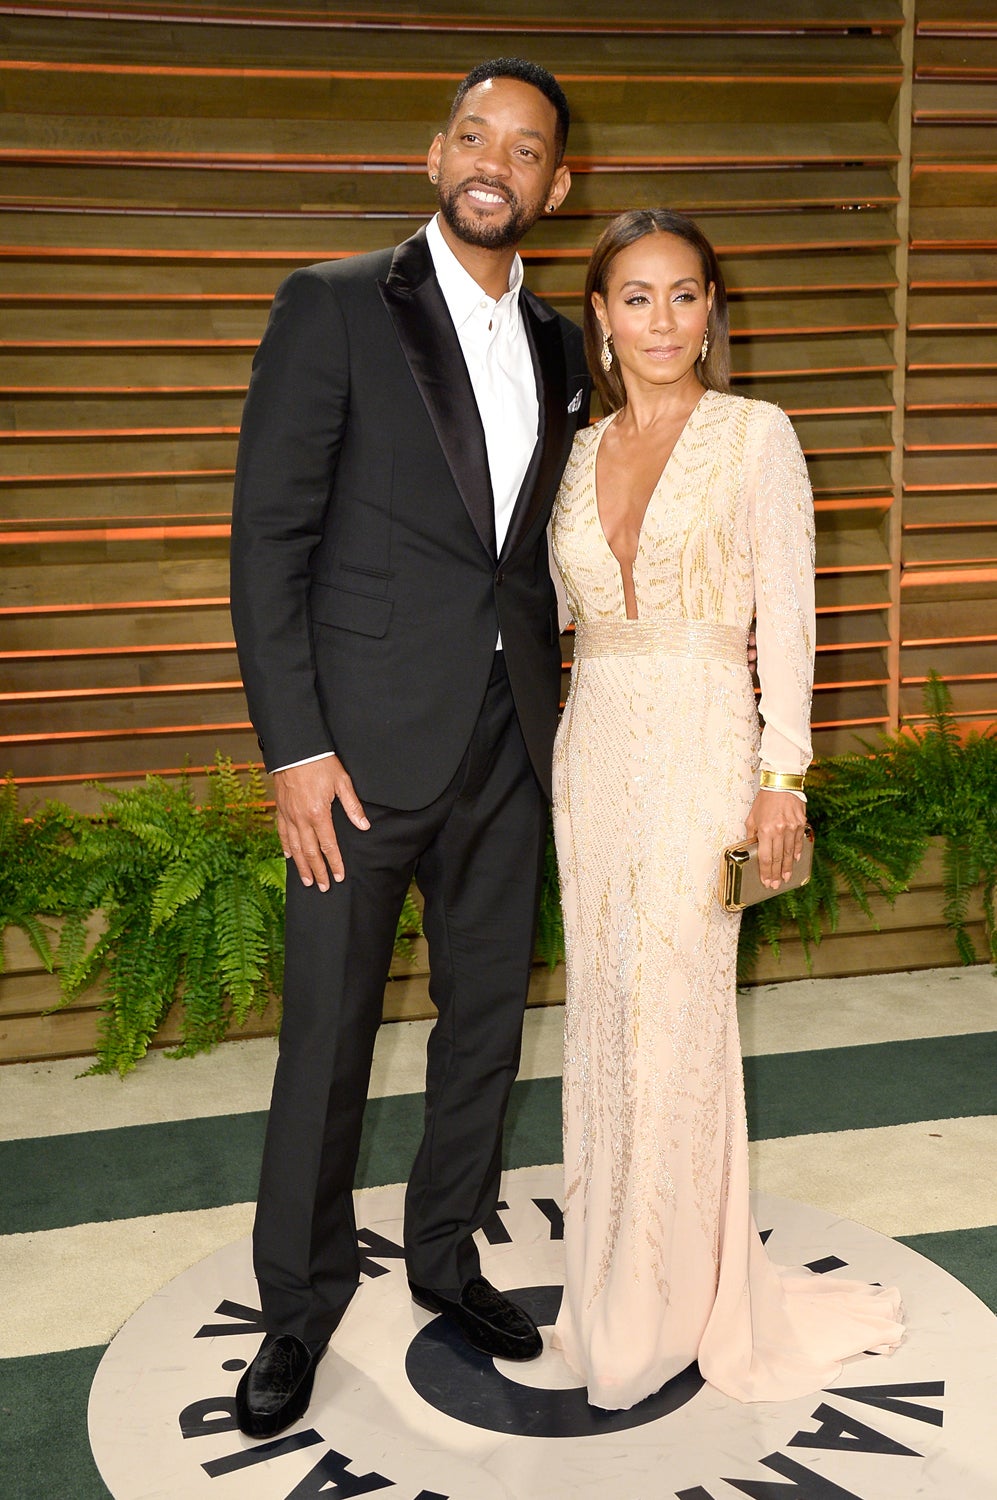 7 Reasons Why Will Smith and Jada Pinkett Smith Give Us the Ultimate #RelationshipGoals
